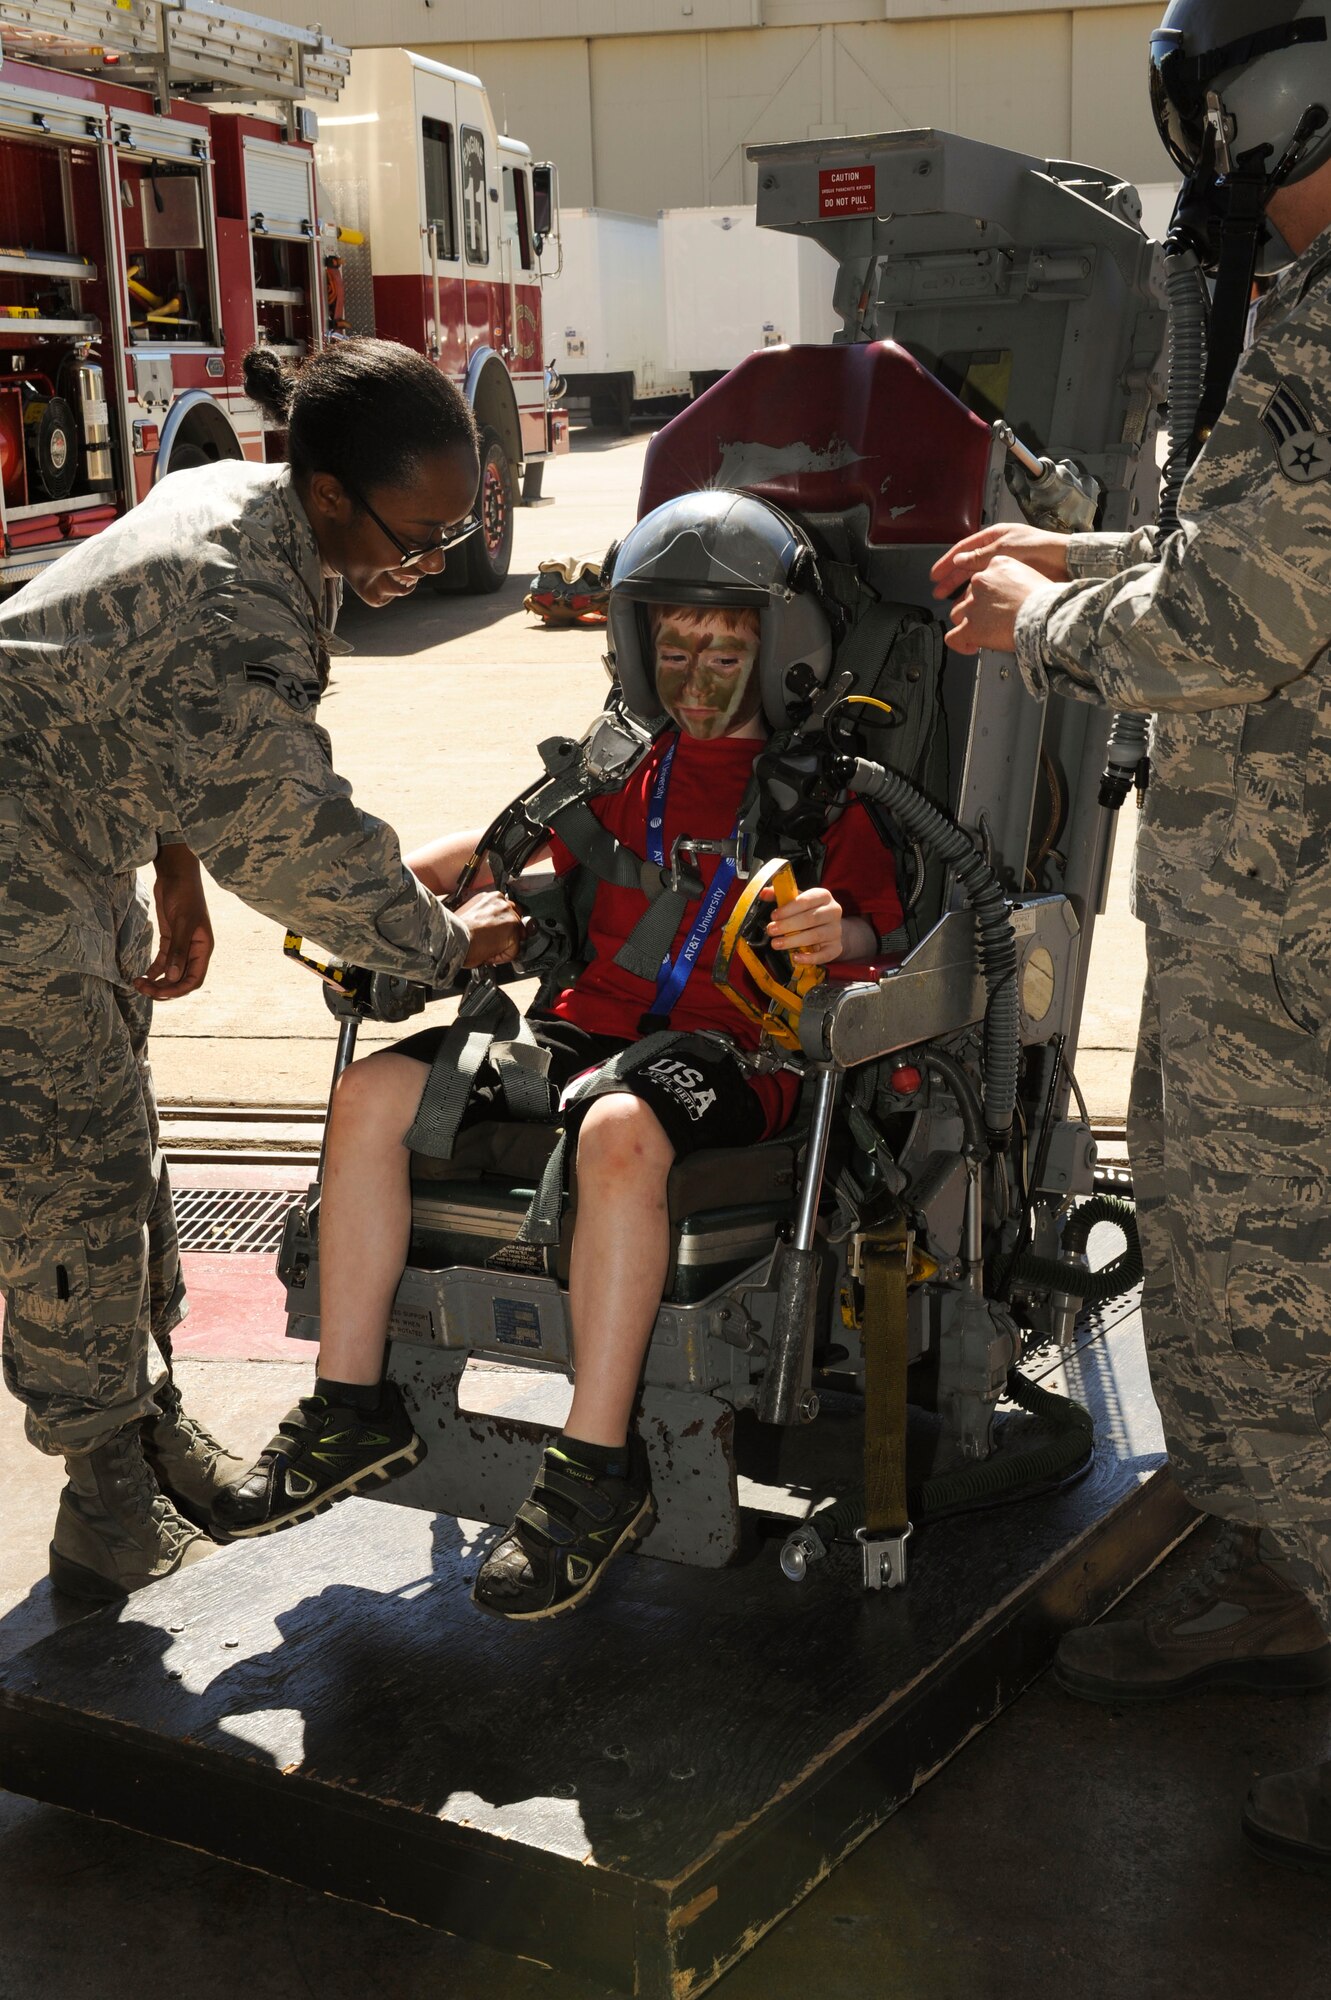 A child sits in an ejection seat during Operation Heroes at Minot Air Force Base, N.D., June 3, 2017. Operation Heroes is an annual event hosted by the 5th Force Support Squadron that allows military children to undergo a mock deployment to help them better understand what their parents experience abroad. (U.S. Air Force photos/Senior Airman Sahara L. Fales)